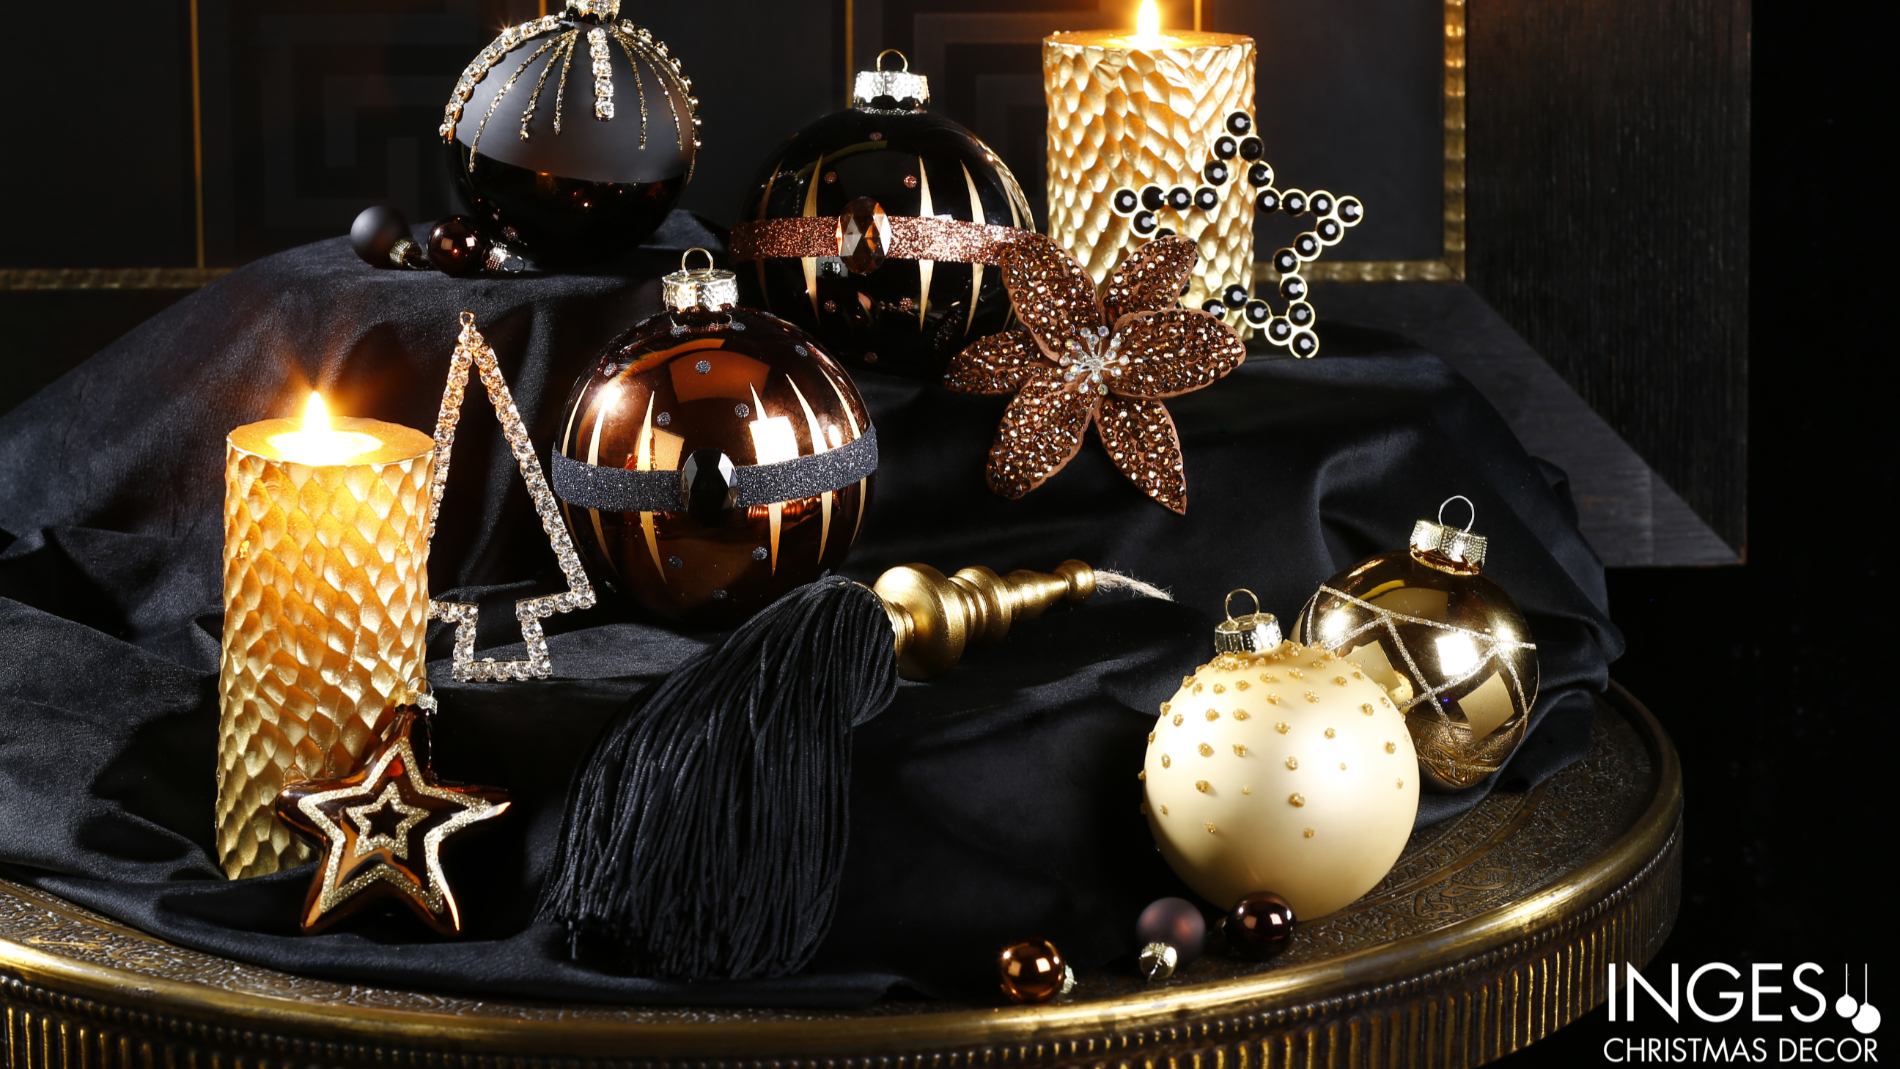 Timeless Luxury shows an elegant combination of black, brown and gold. Photo: Inge’s Christmas Decor